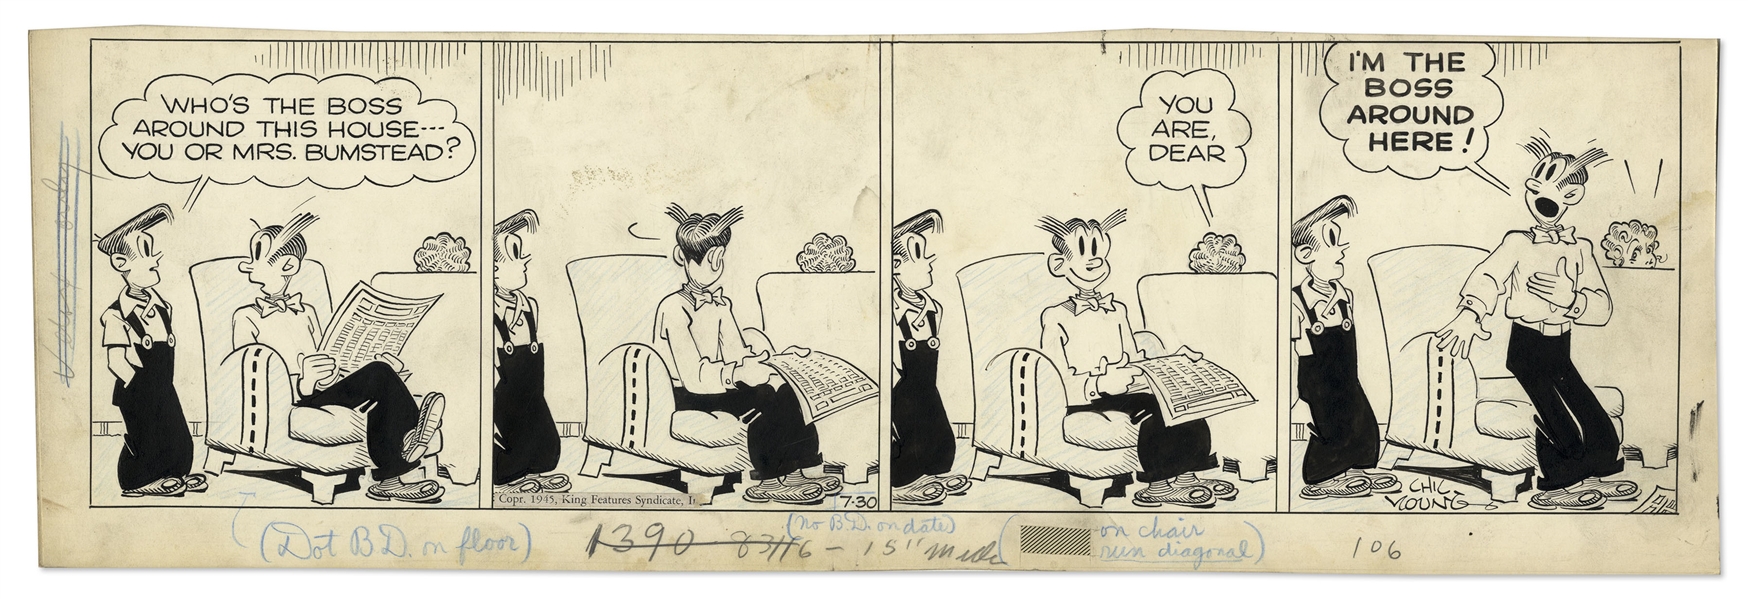 Chic Young Hand-Drawn ''Blondie'' Comic Strip From 1945 Featuring Blondie & Dagwood -- Titled, ''Just an Honorary Title''